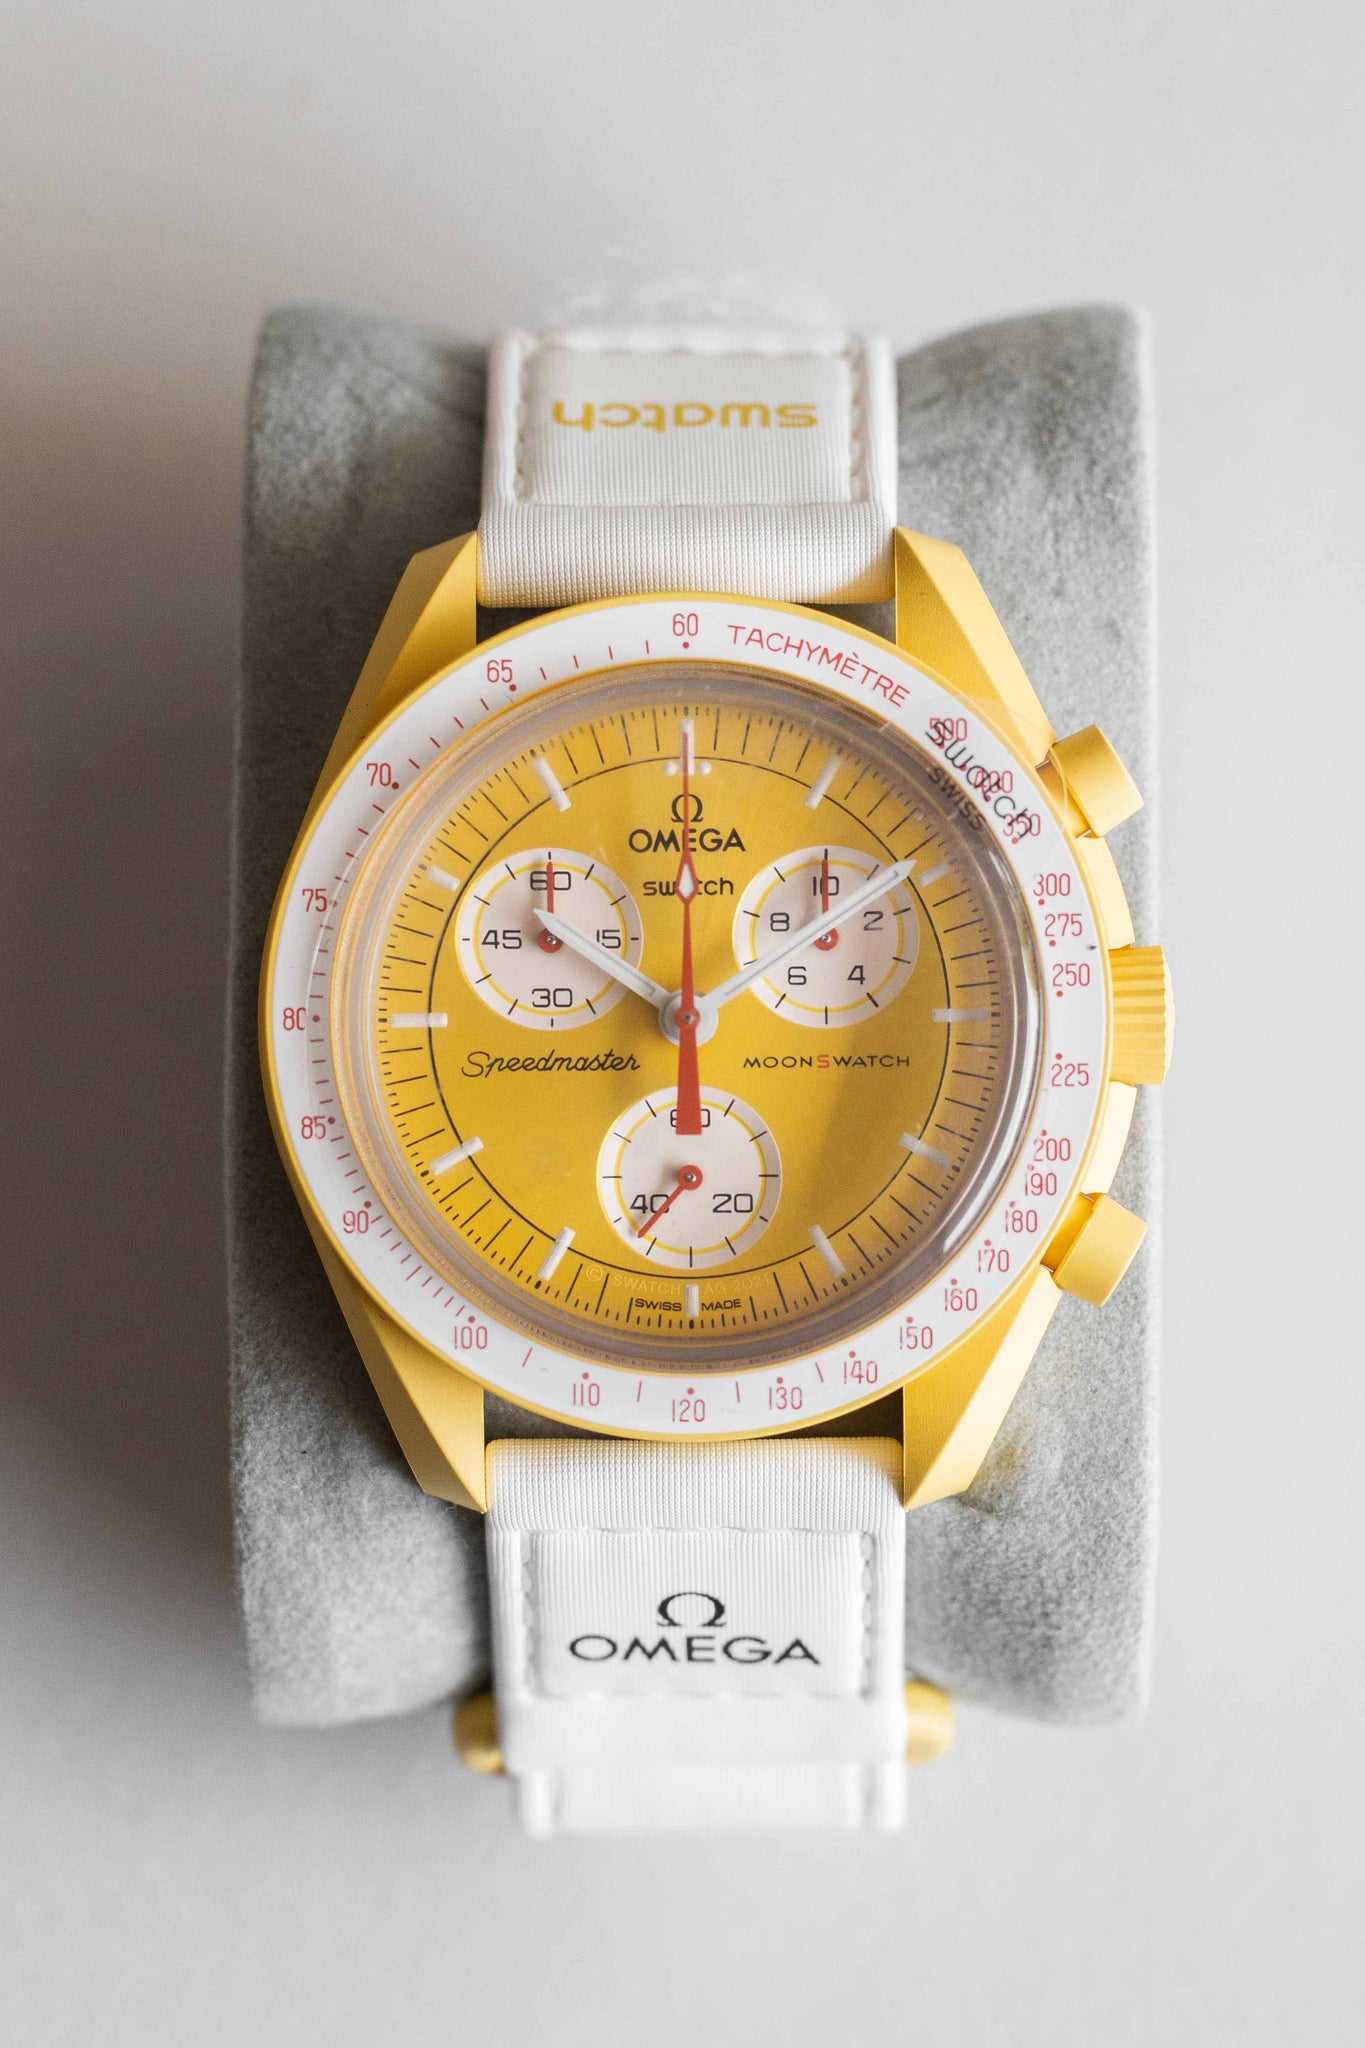 Omega swatch mission to the sun | nate-hospital.com